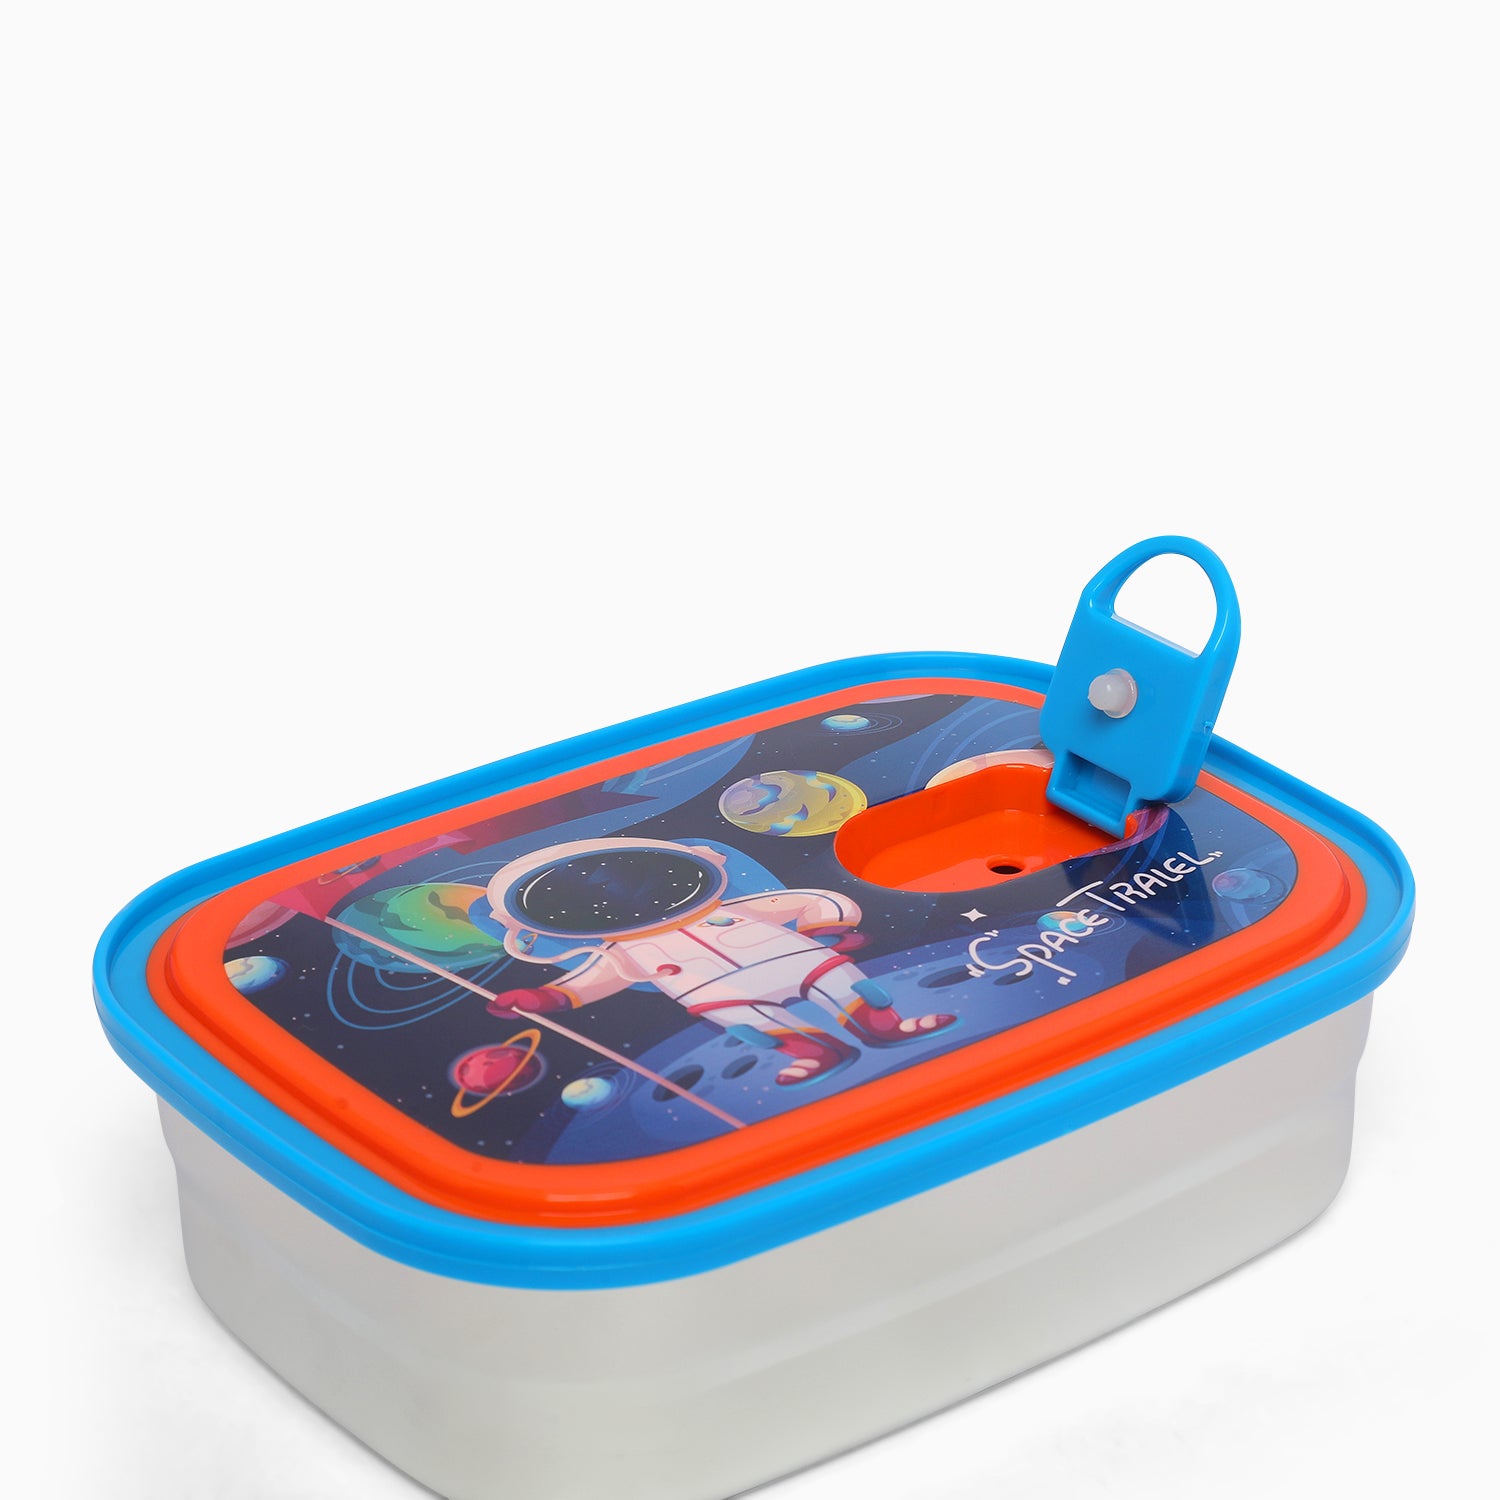 Space Stainless-Steel 2 compartment Lunch Box for Kids